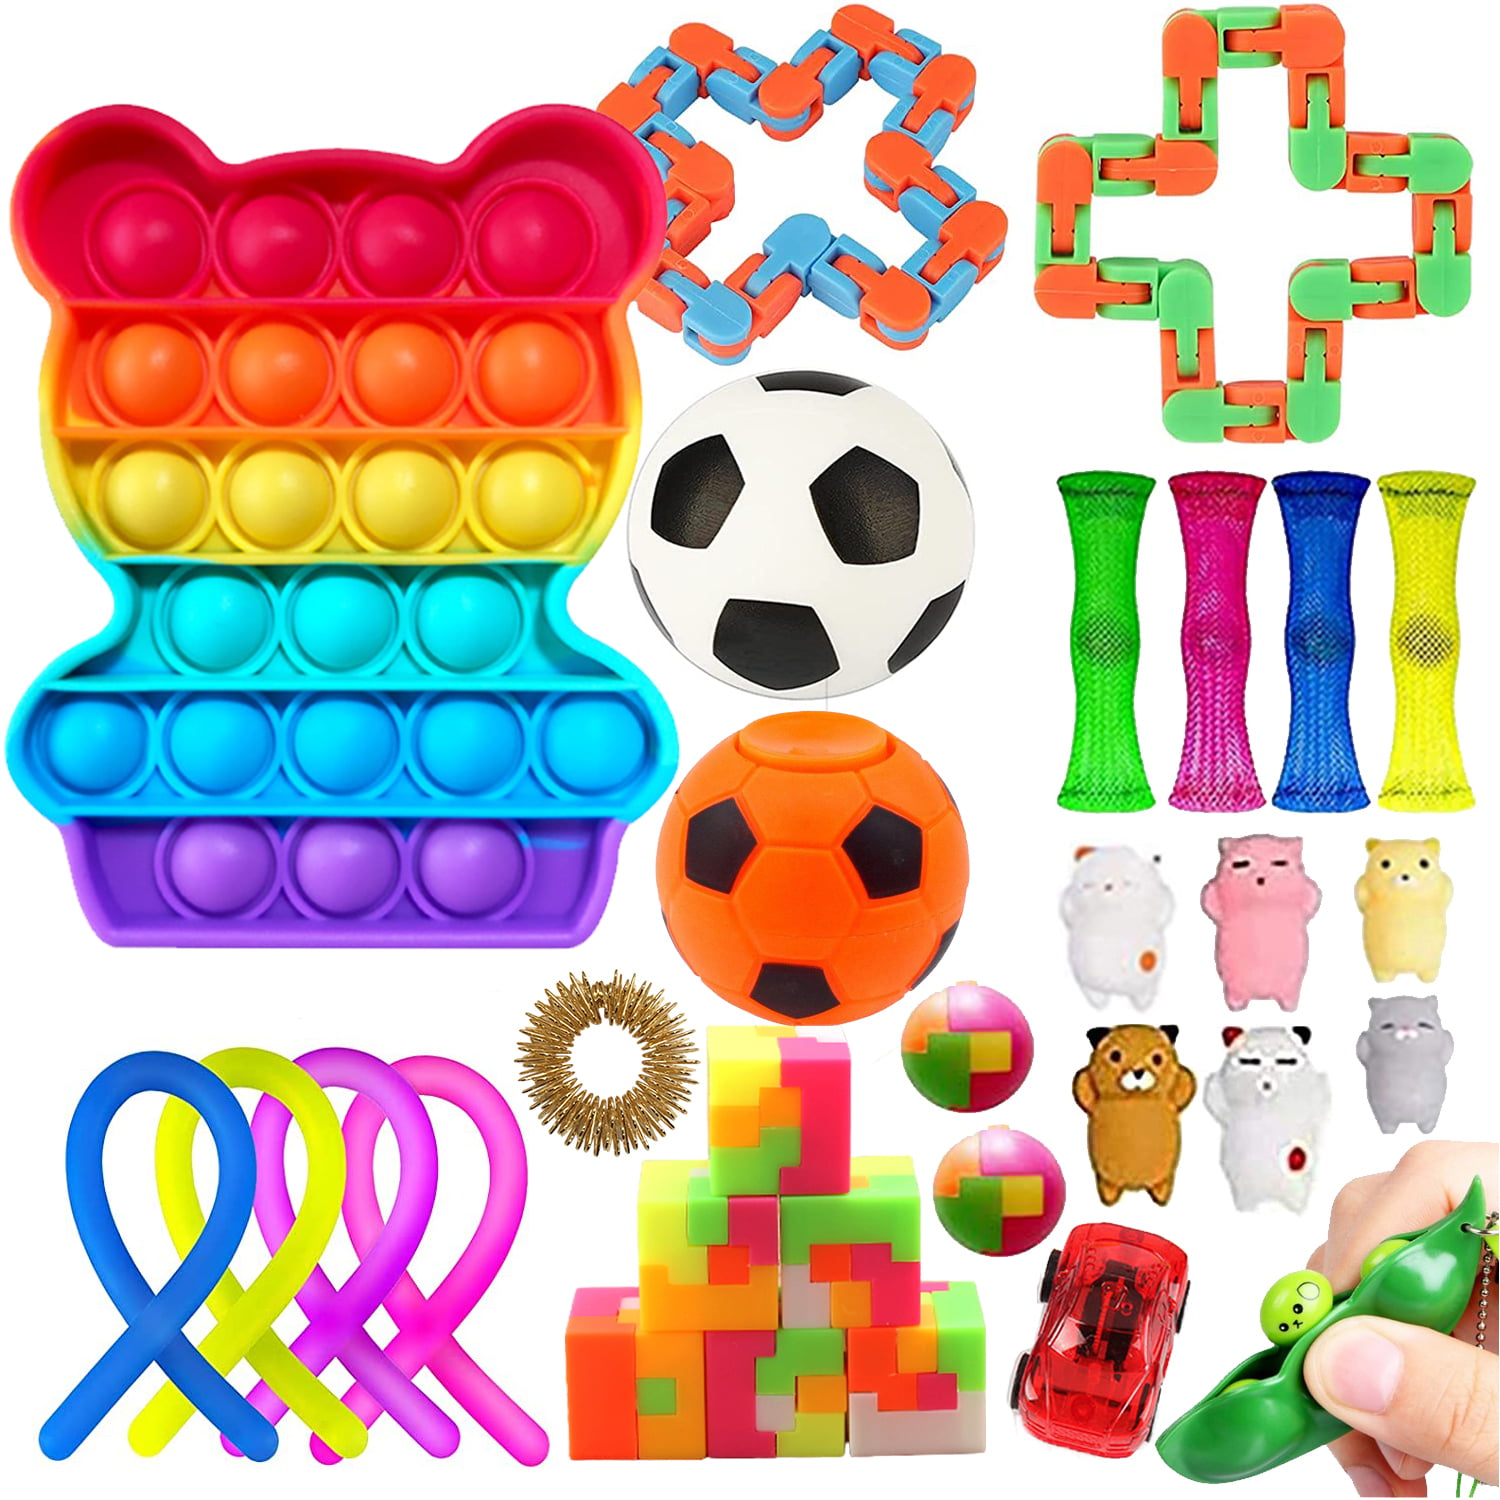 Details about   Autism ADHD Stress FIDGET TOYS Stress Relief Hand Spinners Sensory Toy Fun Gift 